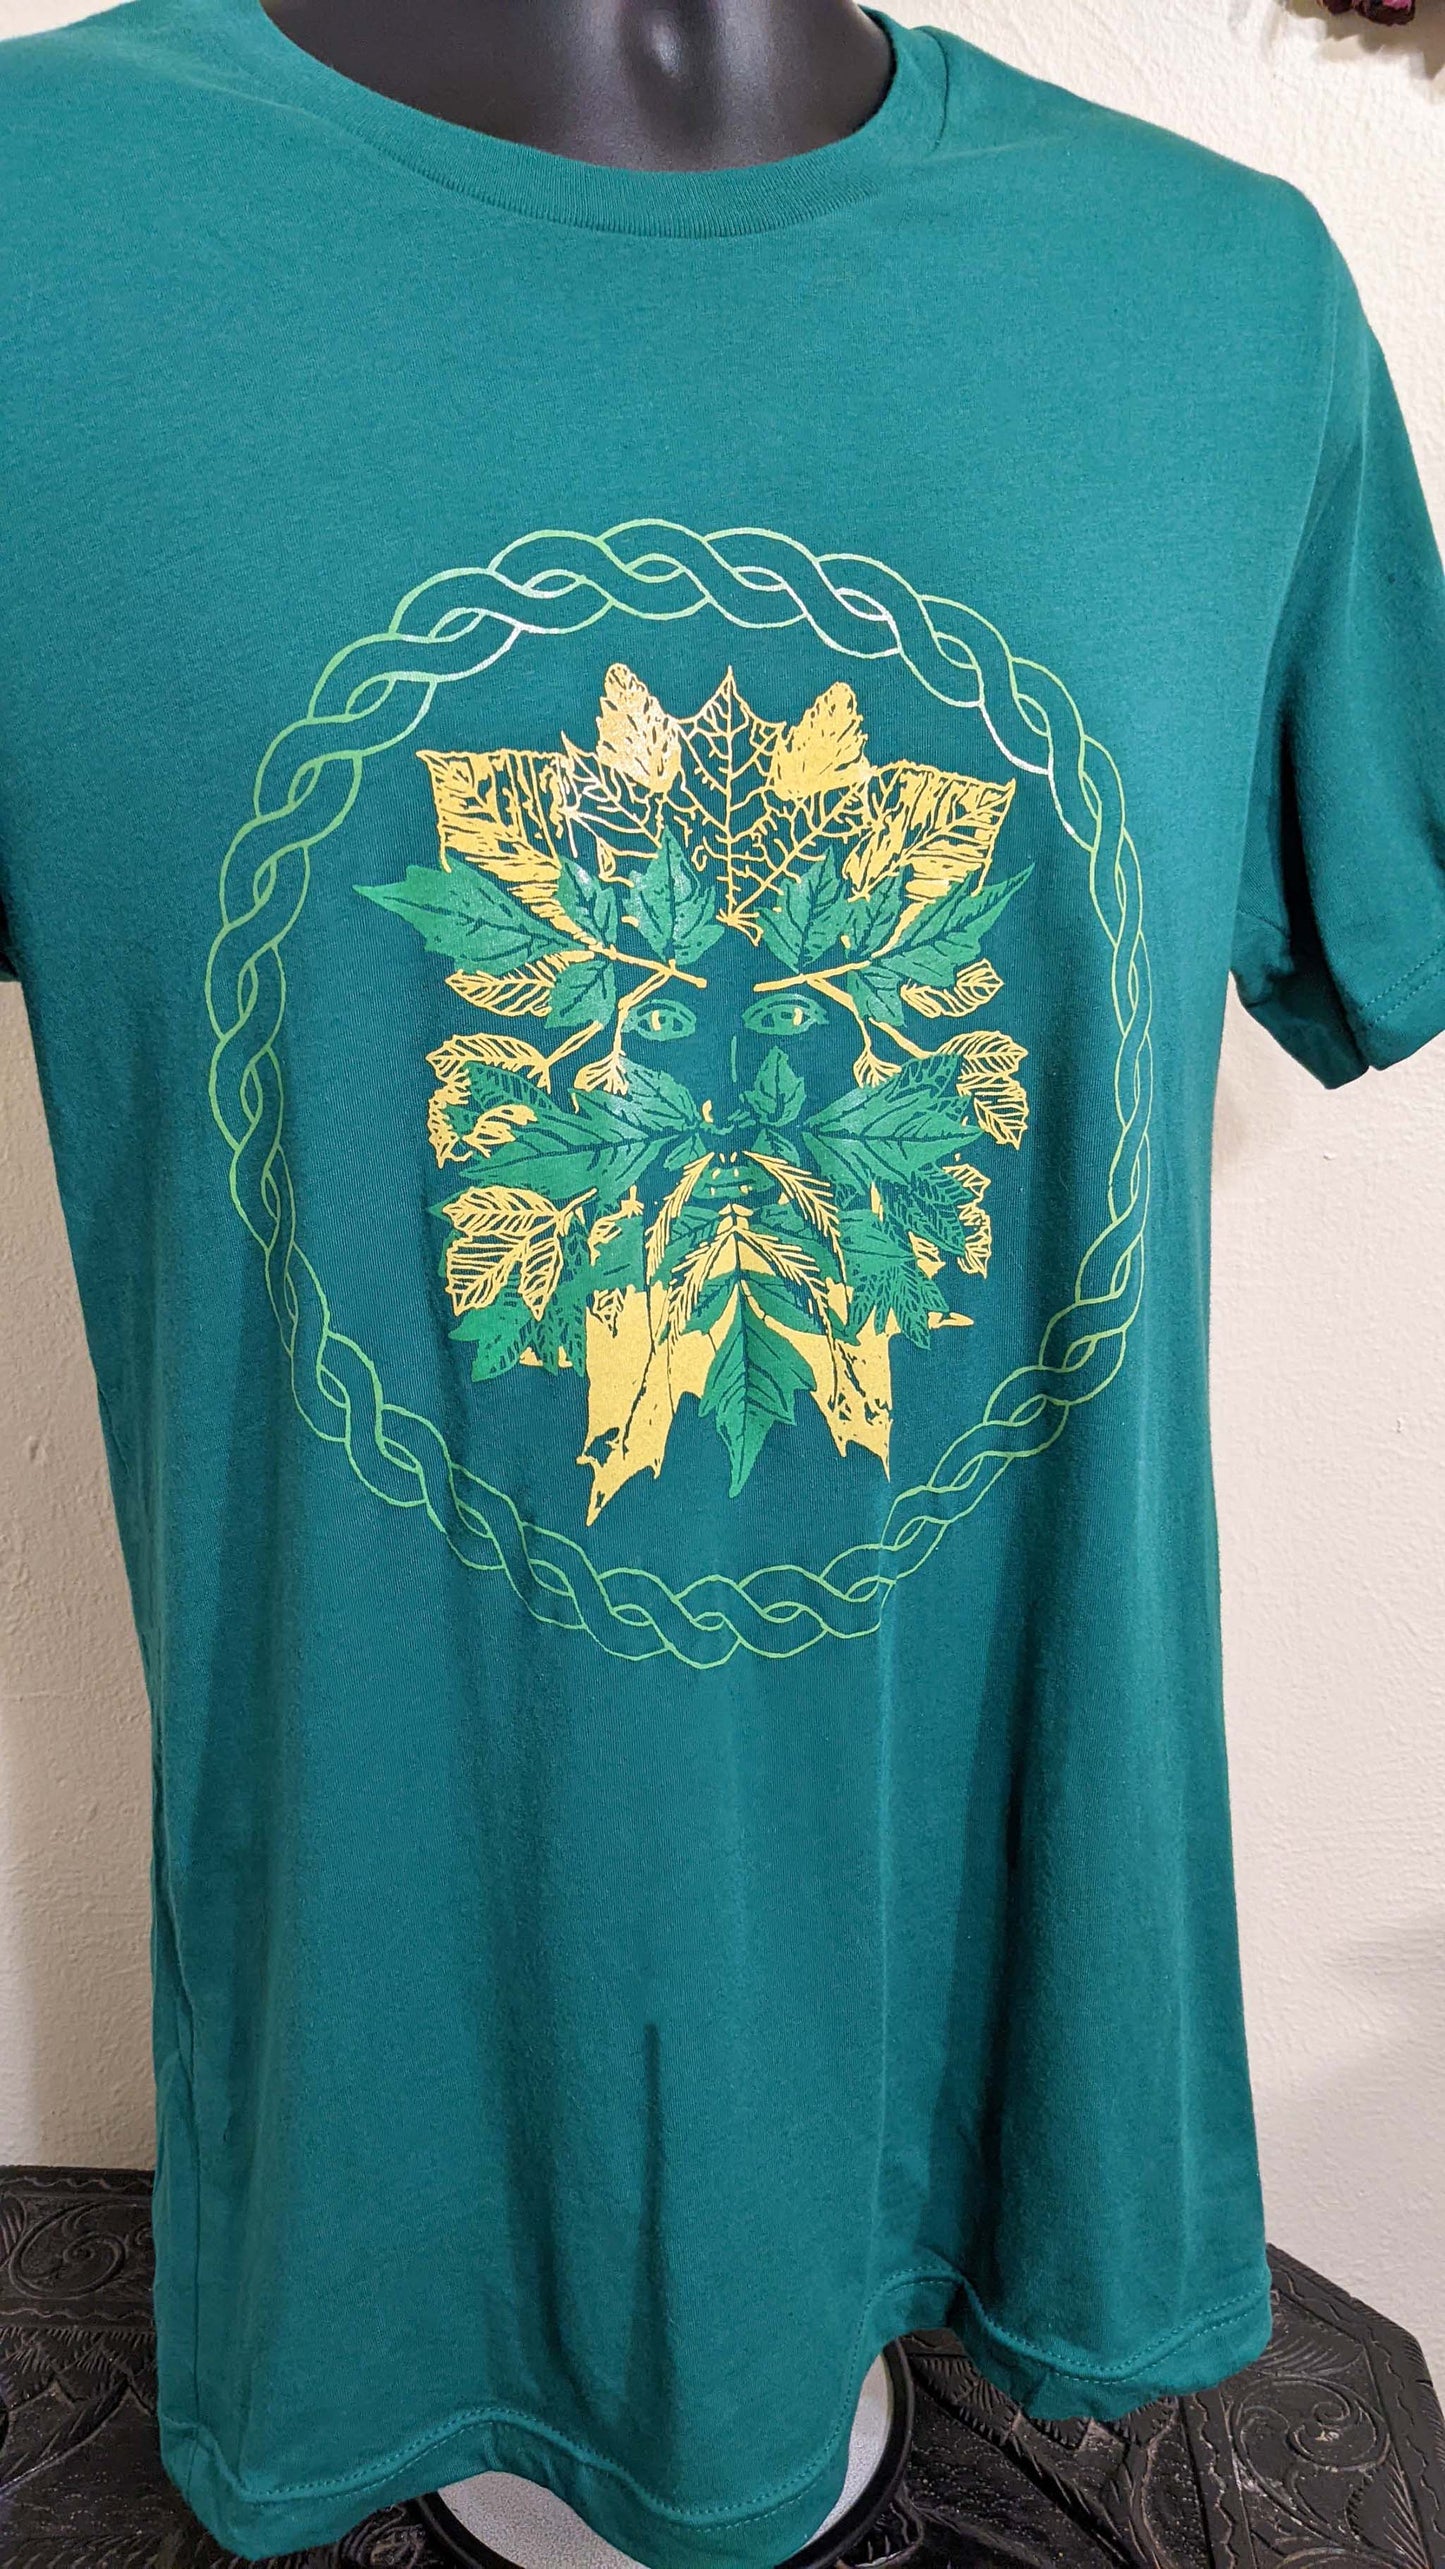 Green Man - Unisex Cut Forest Green With Yellow Leaves T-Shirt